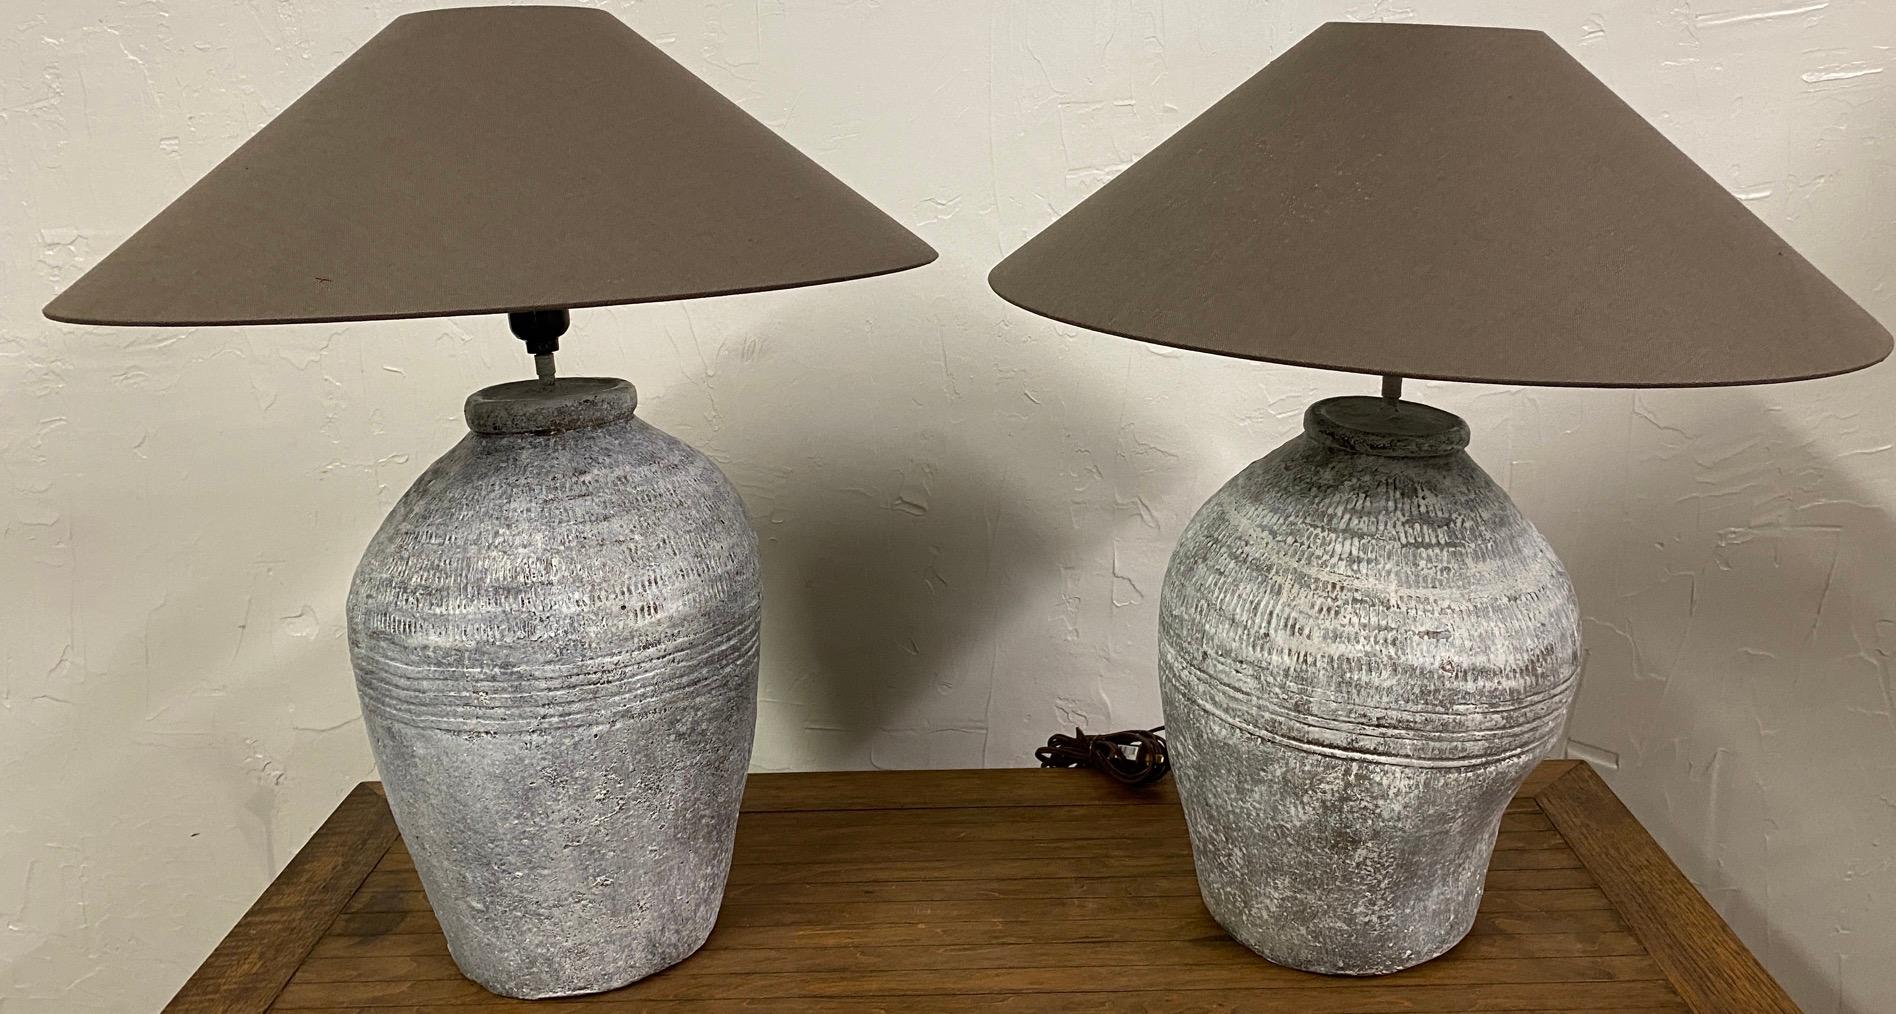 Pair of similar white painted, grey green terracotta lamp bases made from rustic vintage Chinese clay jars used for wine storage. These are not a matching pair since each of these are hand made and are not intended for decorative use. The jars are